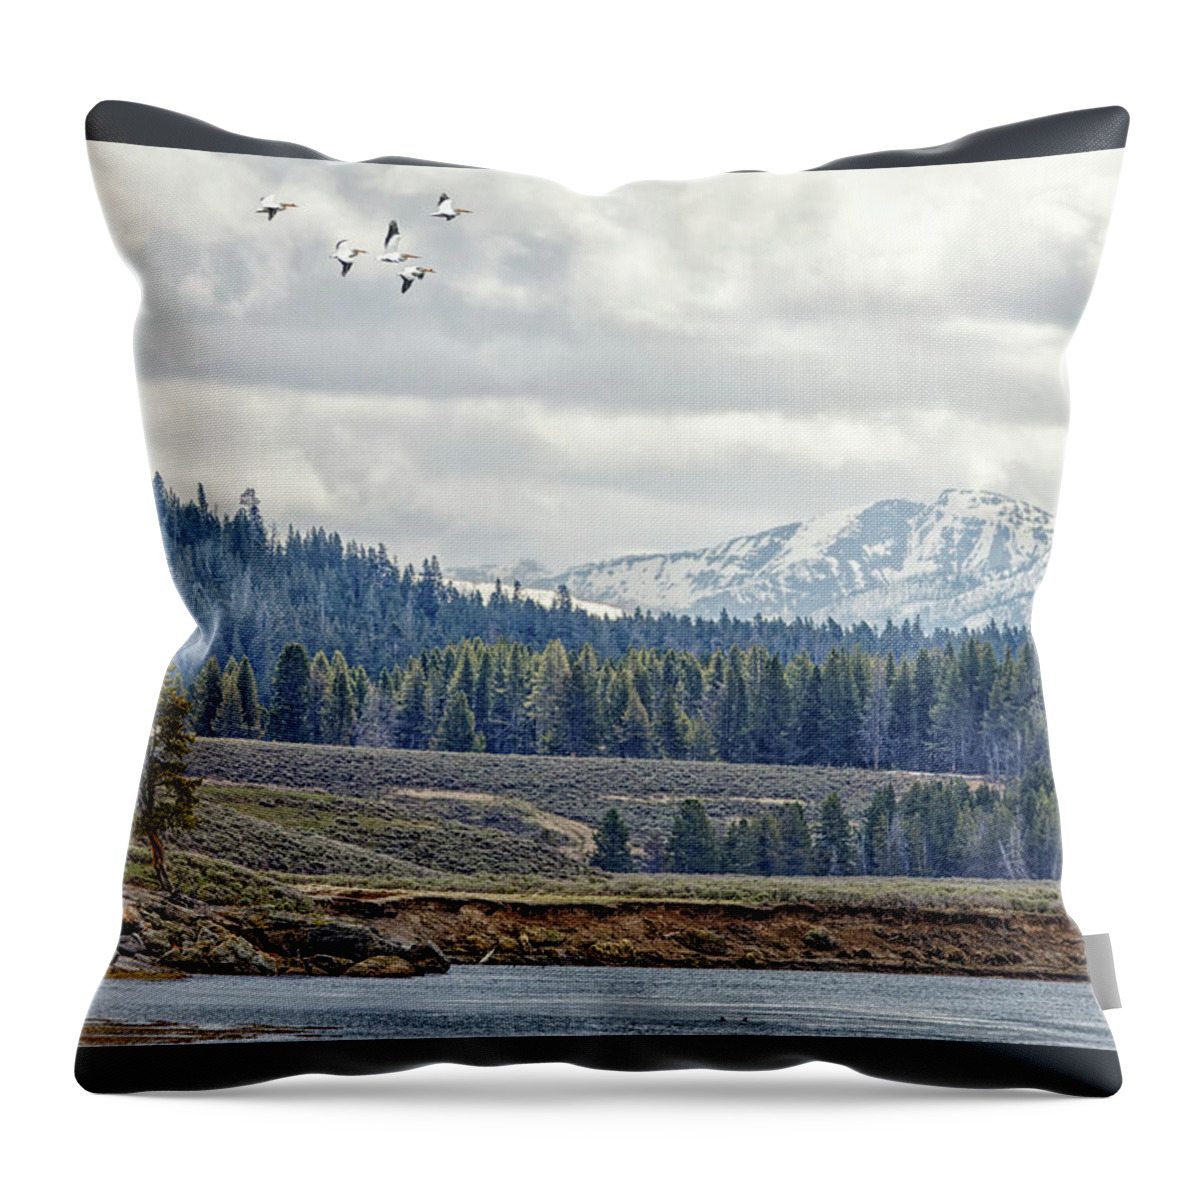 Pelican Throw Pillow featuring the photograph Yellowstone Flight by Natural Focal Point Photography